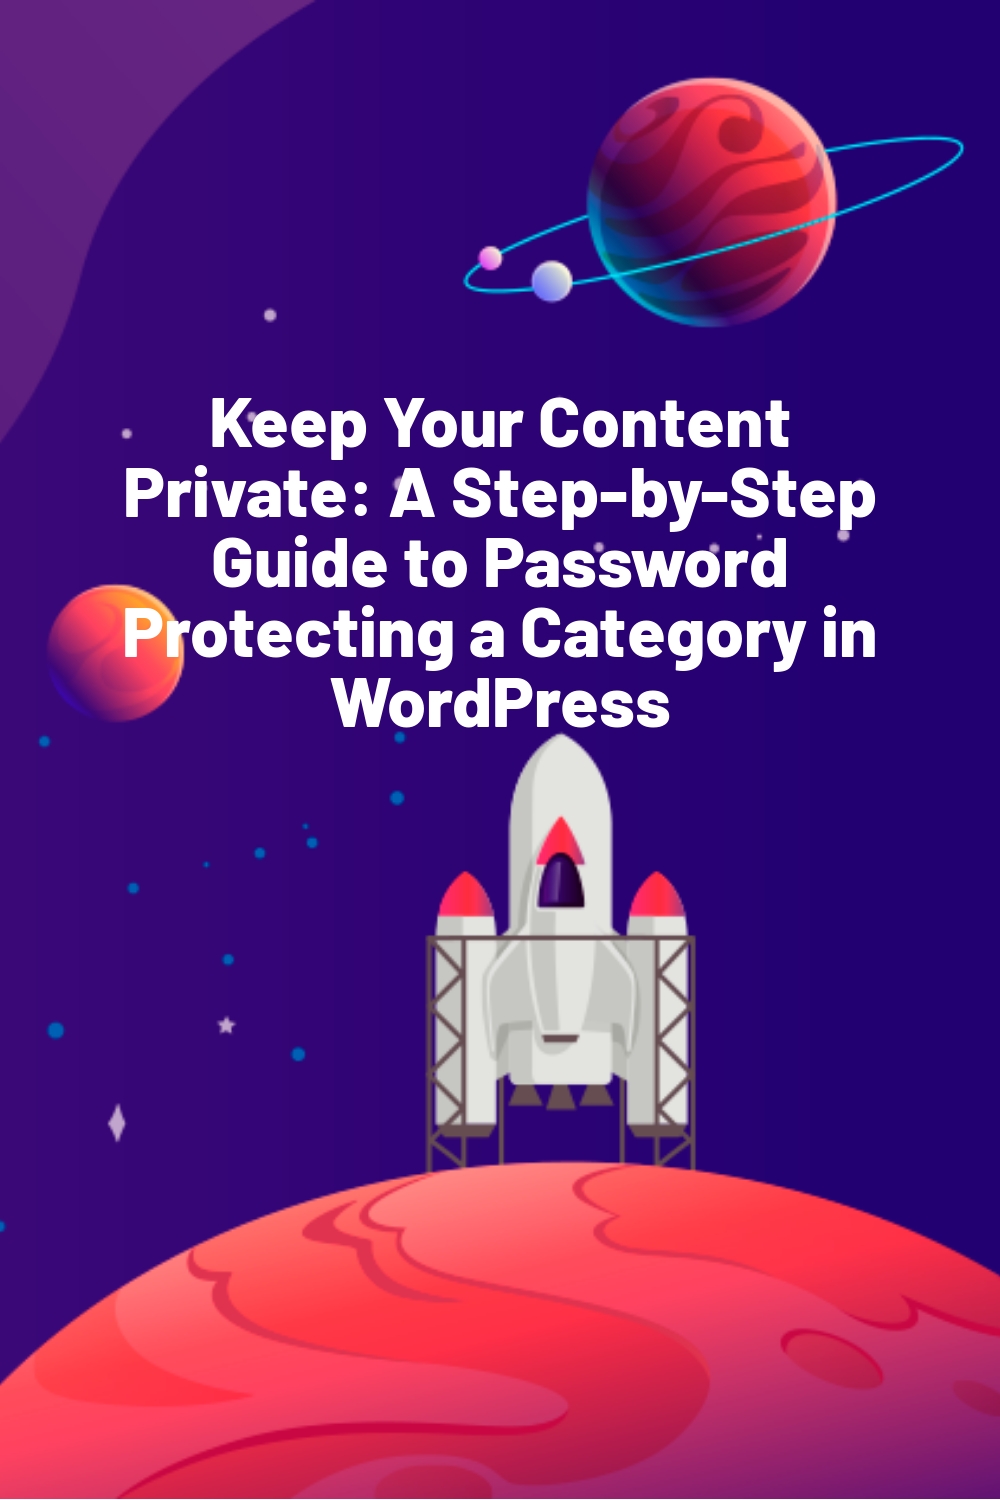 Keep Your Content Private: A Step-by-Step Guide to Password Protecting a Category in WordPress